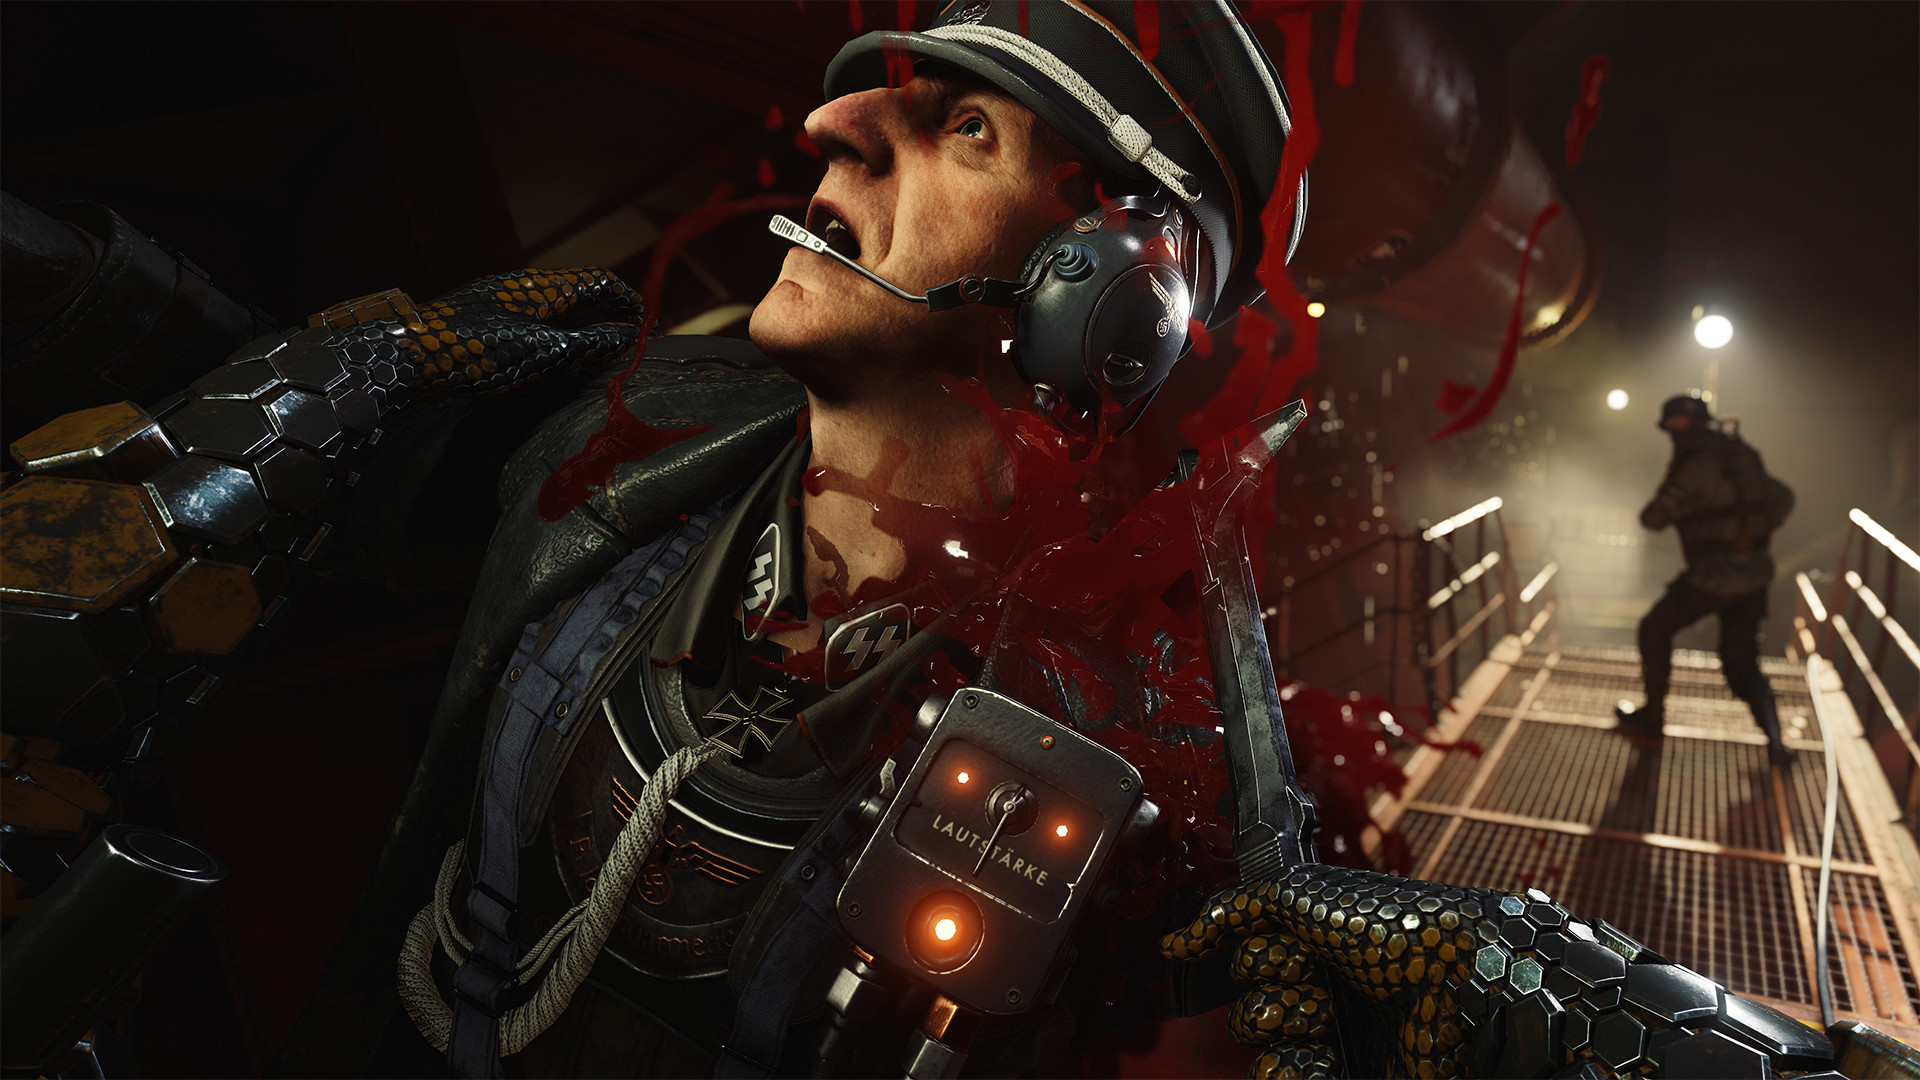 Wolfenstein: The New Order - 10 Tips For The Deathshead Final Boss Fight